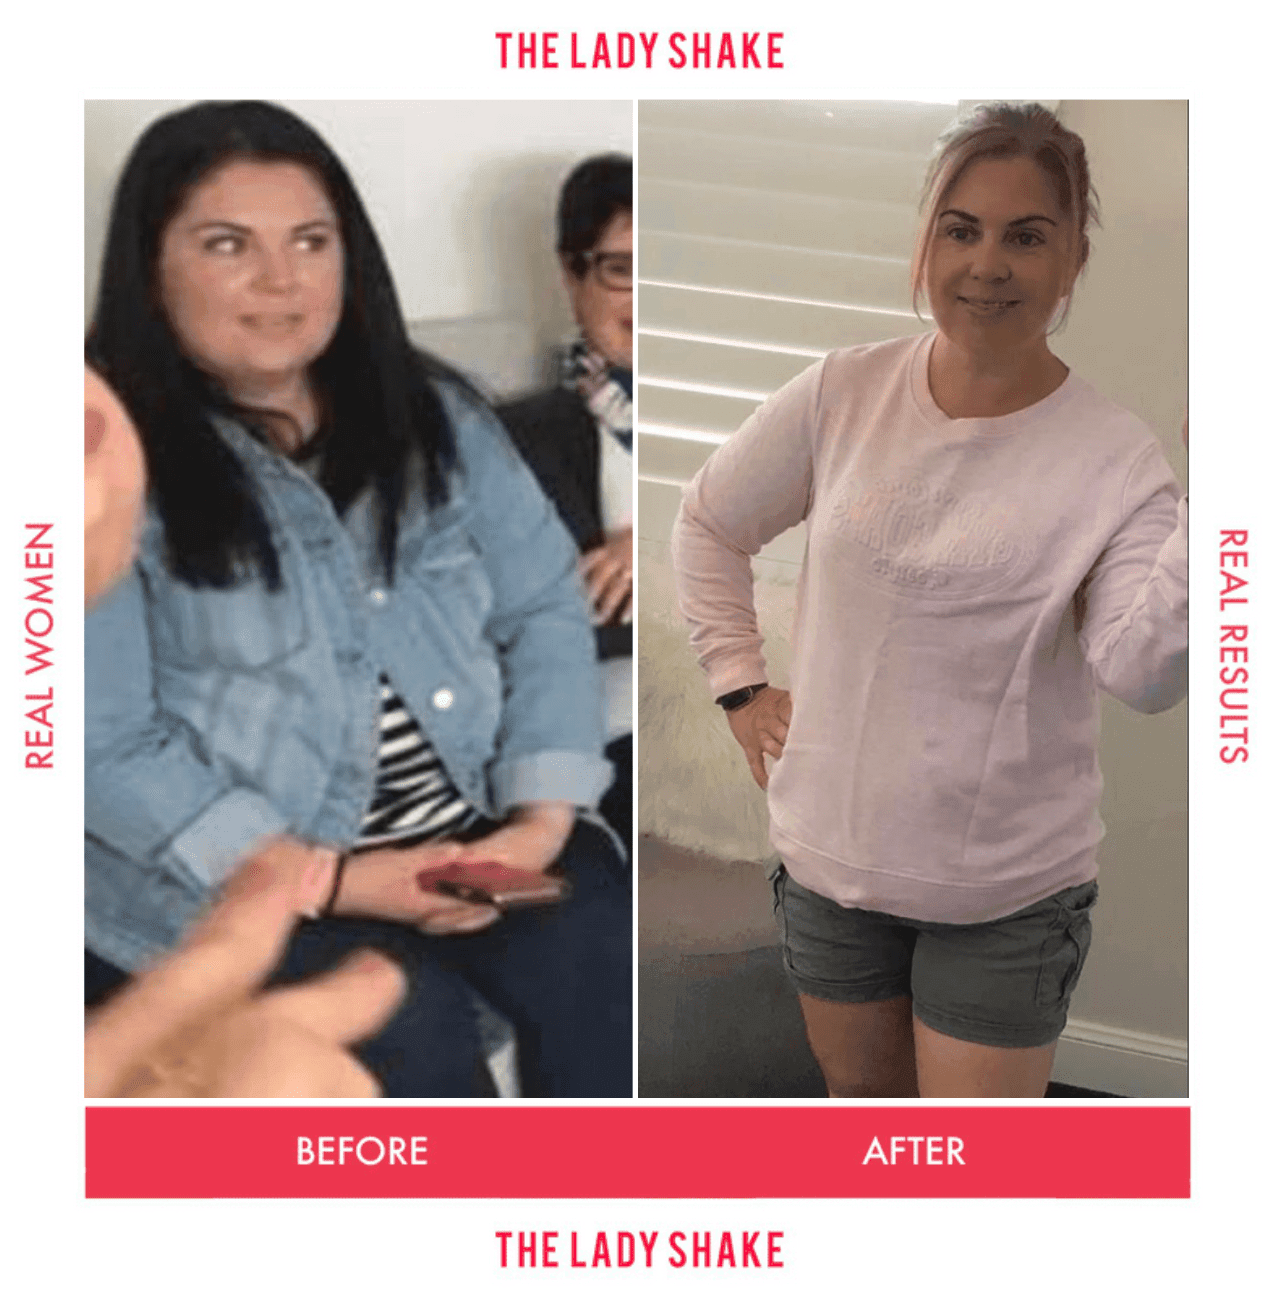 Erin lost 16kg and gained a whole new lifestyle!